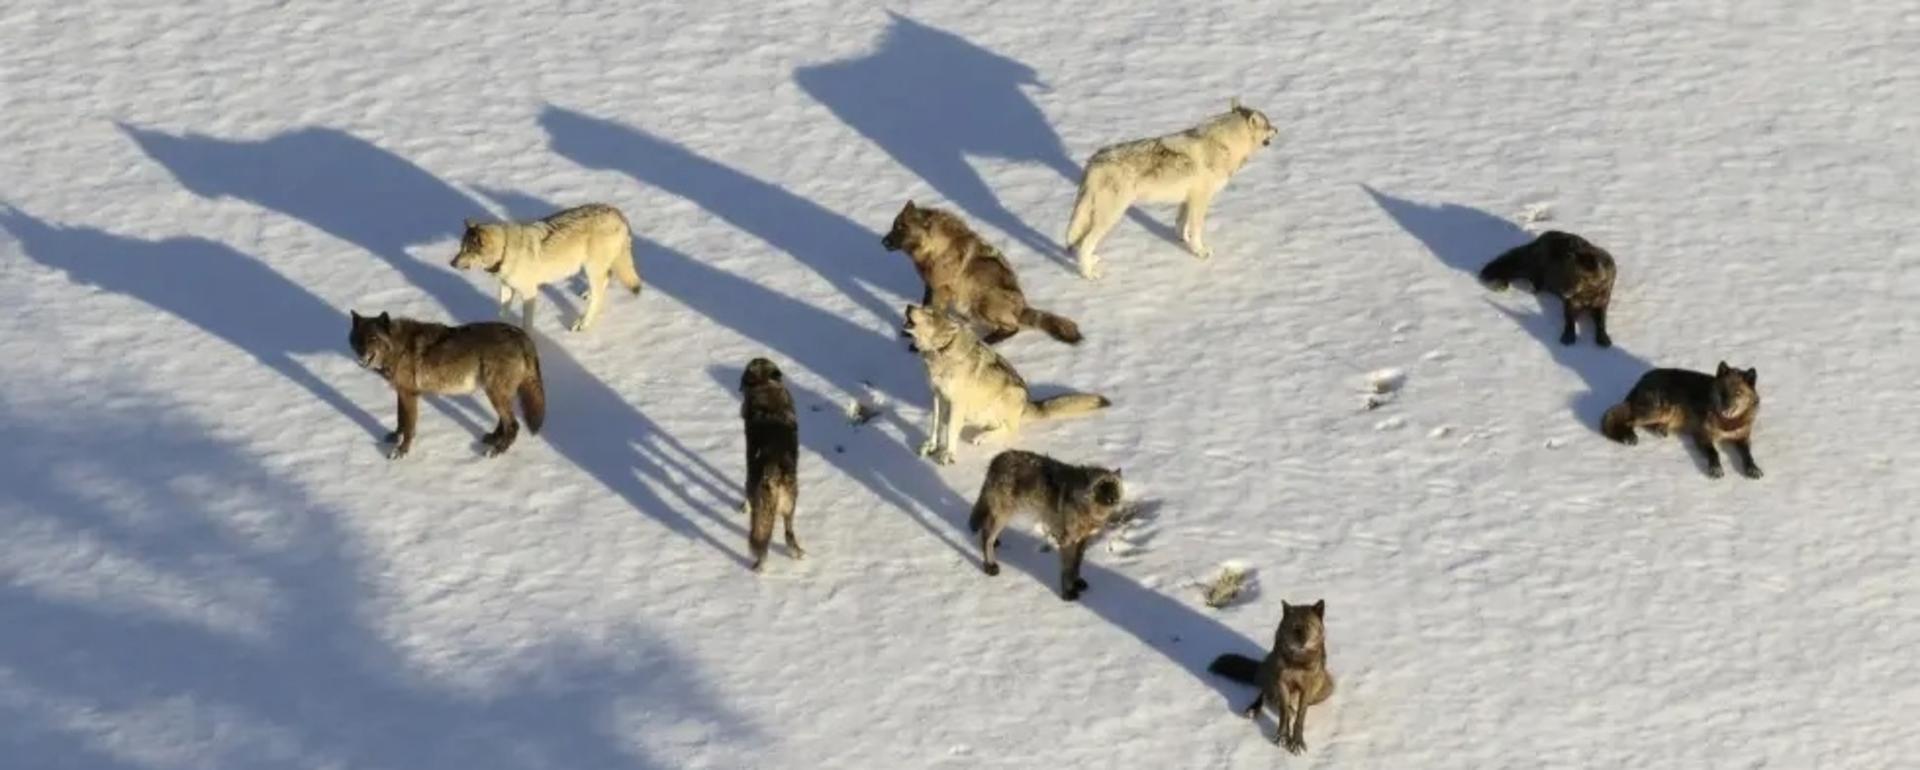 Aerial wolf gunning is a practice used to manage wolves in Montana, Idaho and Wyoming. Conservation groups are pushing back.